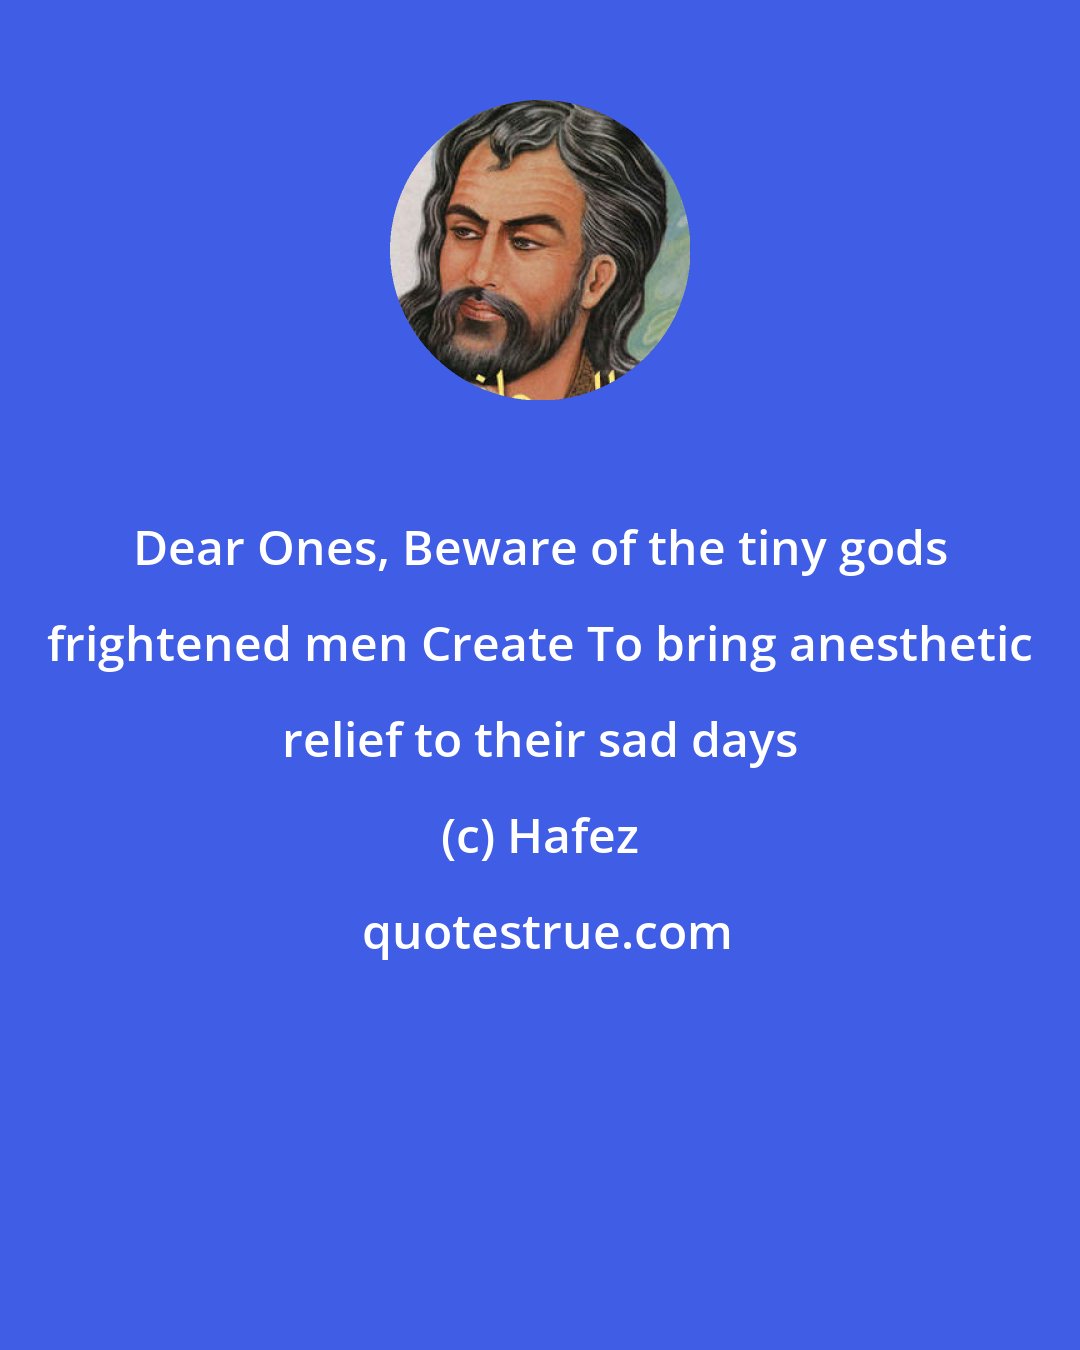 Hafez: Dear Ones, Beware of the tiny gods frightened men Create To bring anesthetic relief to their sad days